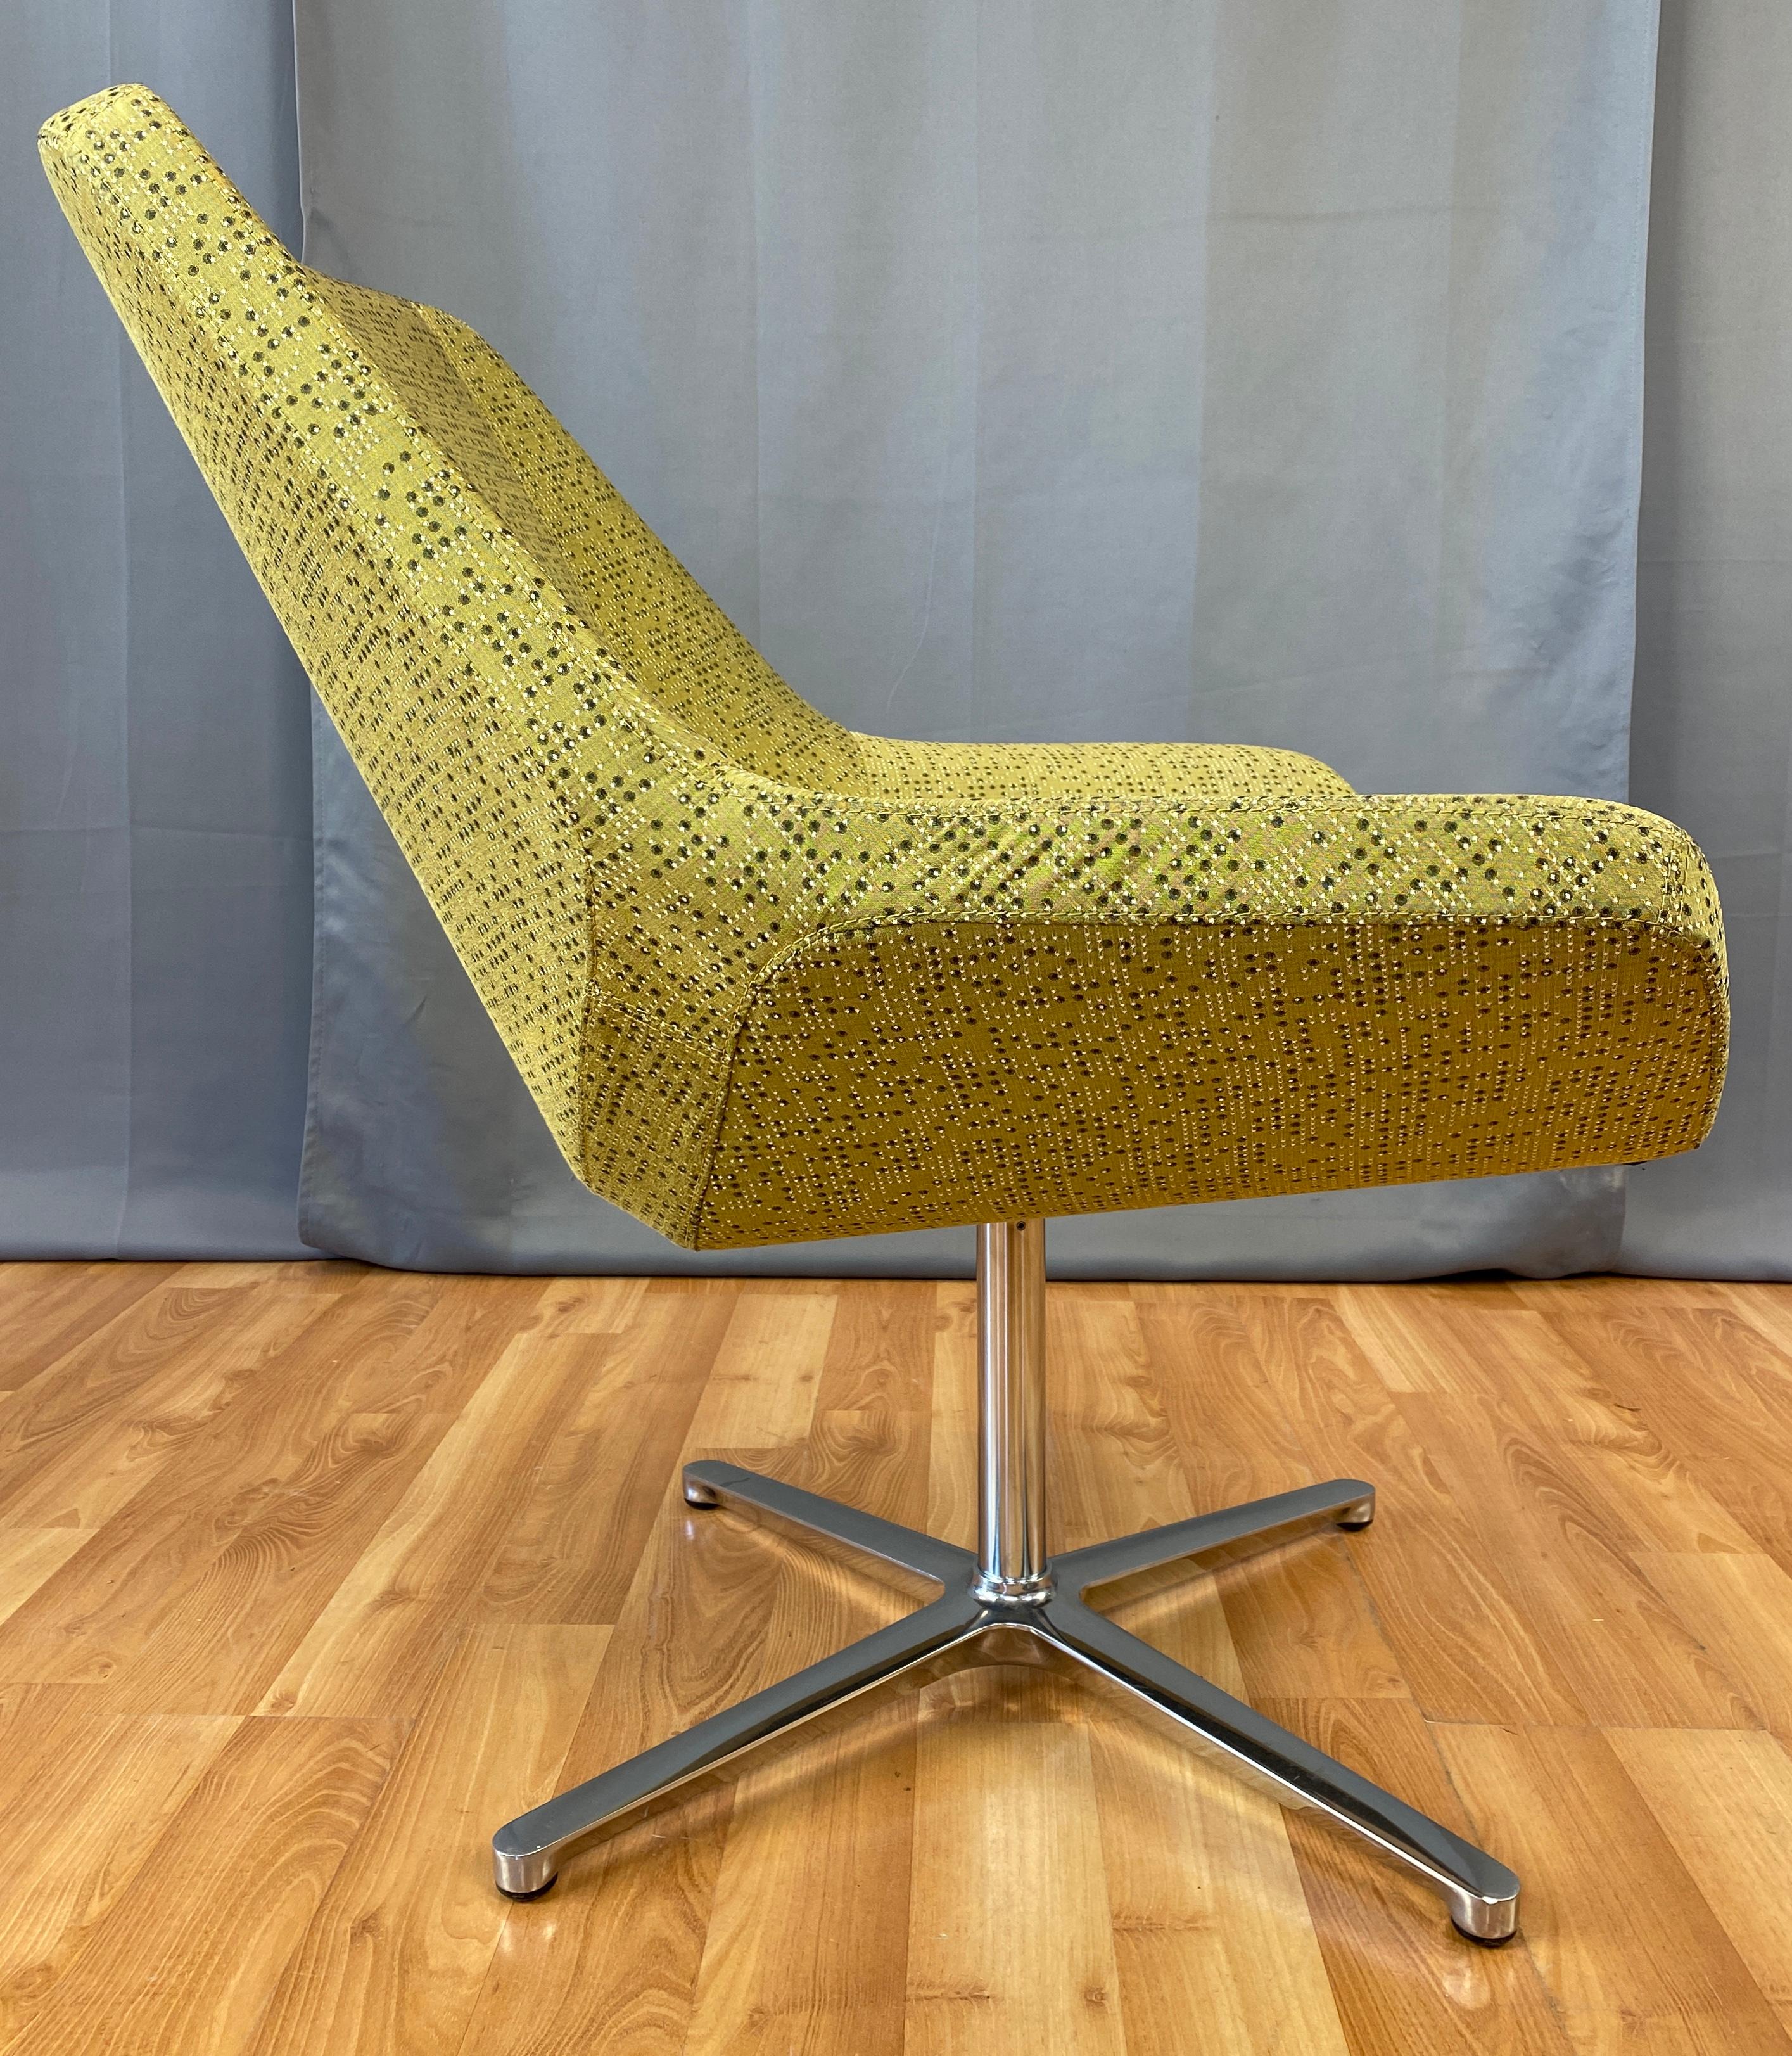 Canadian EOOS designed Cahoots Relax Chair for Keilhauer in Chartreuse A